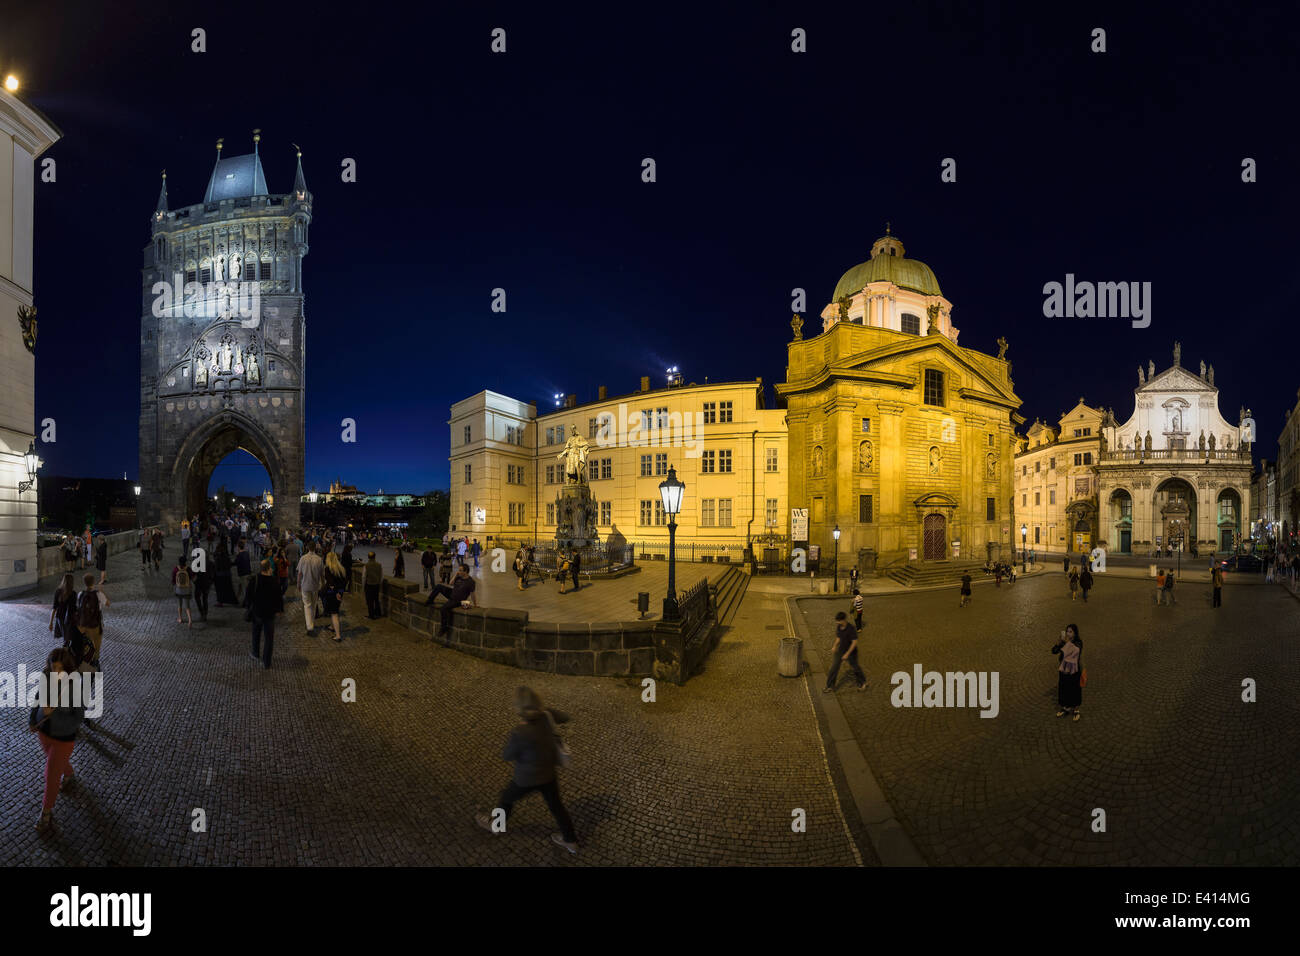 Czechia, Prague, Knights of the Cross Square with Old Town bridge tower, Church of St Francis and a Neo-Gothic statue of Charles IV, Church of St Saviour right Stock Photo